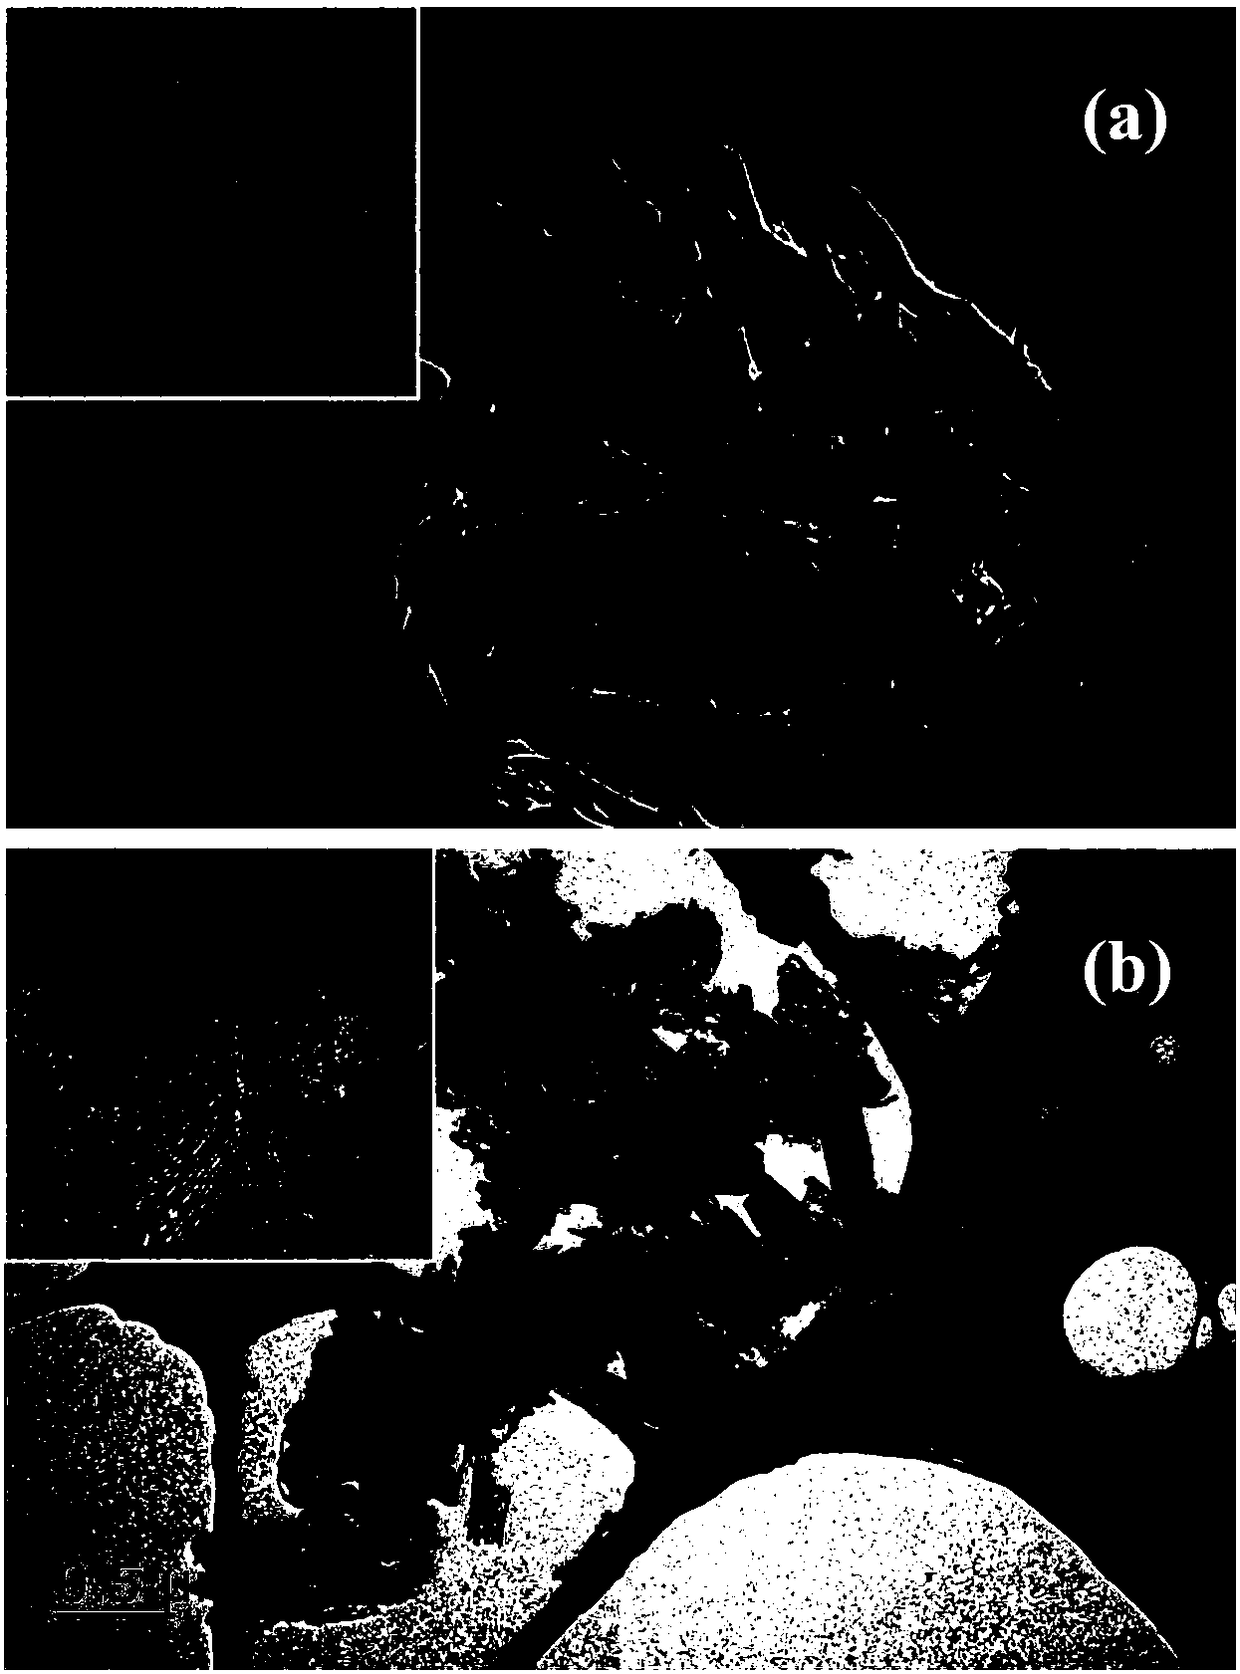 Method for preparing magnesium diboride superconducting wire rod by using graphite-like phase carbon nitride in-situ coating boron powder